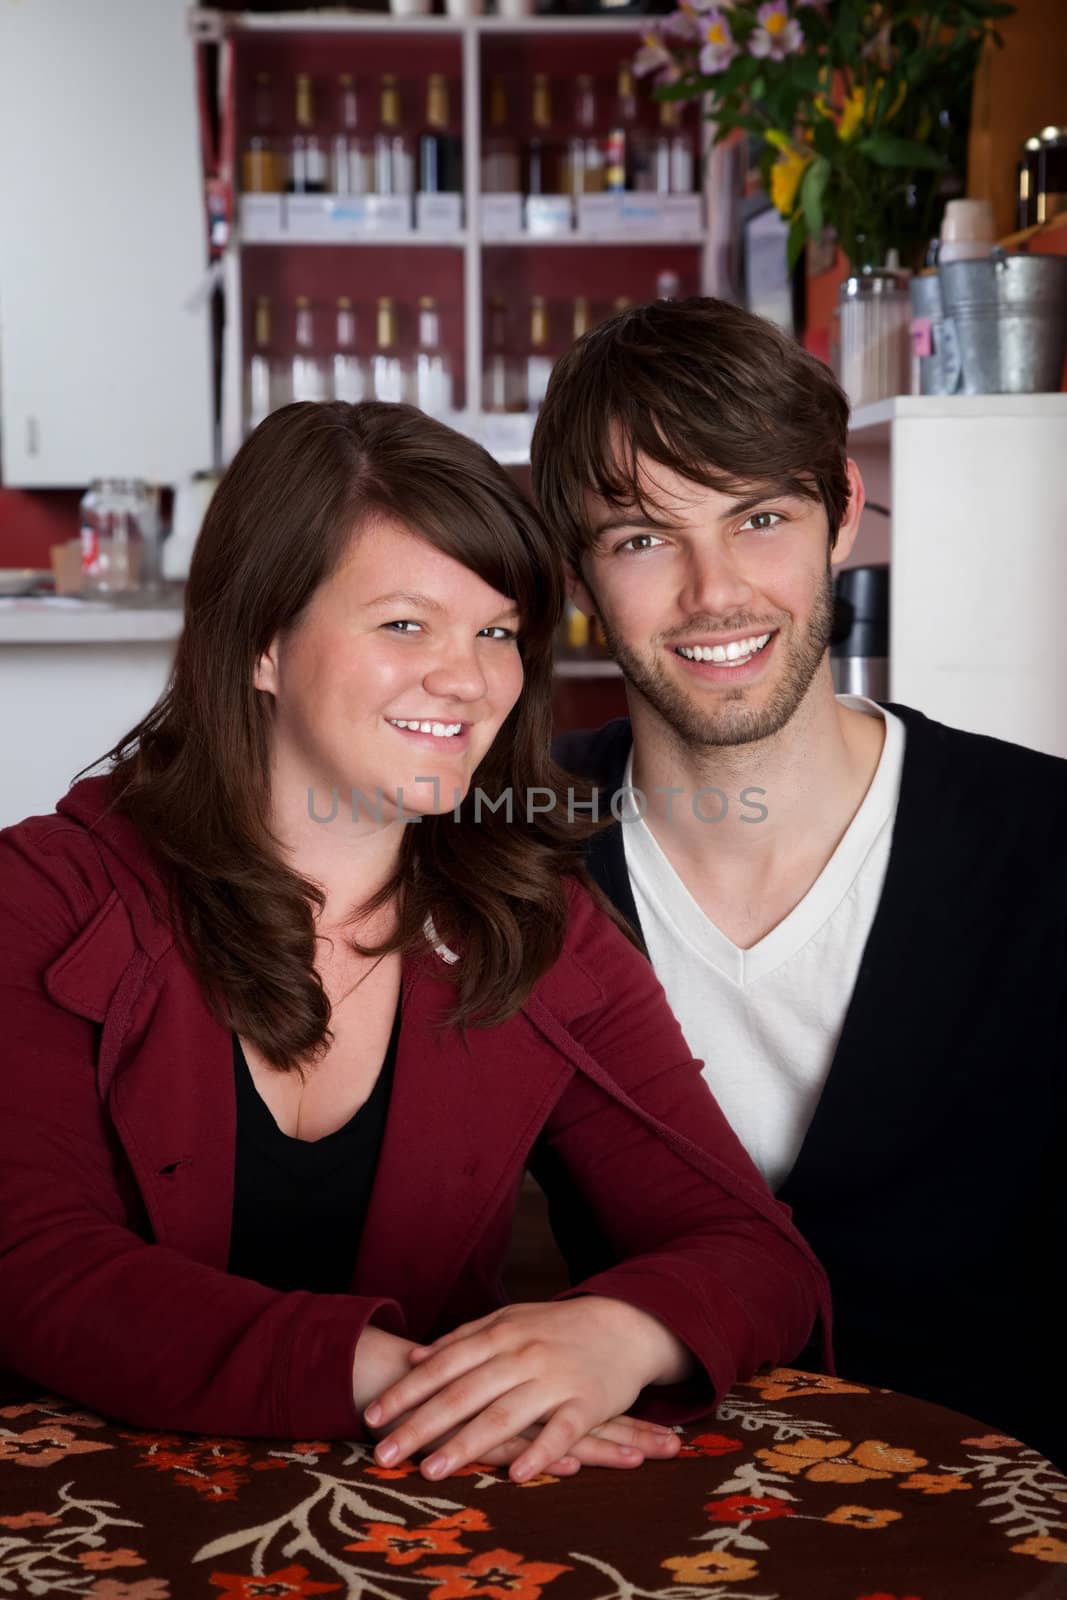 Smiling couple sitting together in a cafe